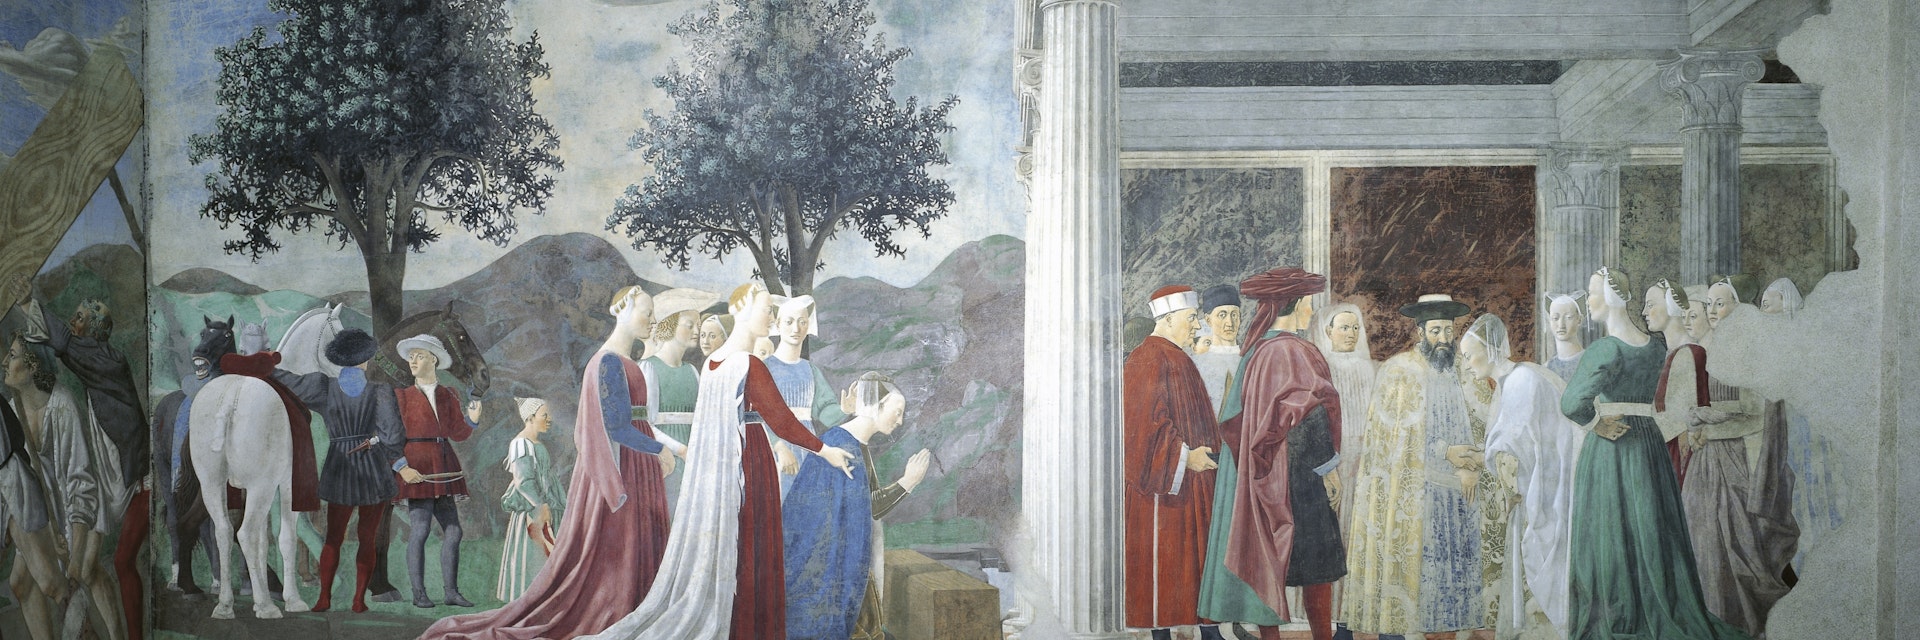 Detail from the Legend of the True Cross showing adoration of Sacred Wood and meeting of Queen of Sheba and King Solomon, by Piero della Francesca, 1452-1466, fresco